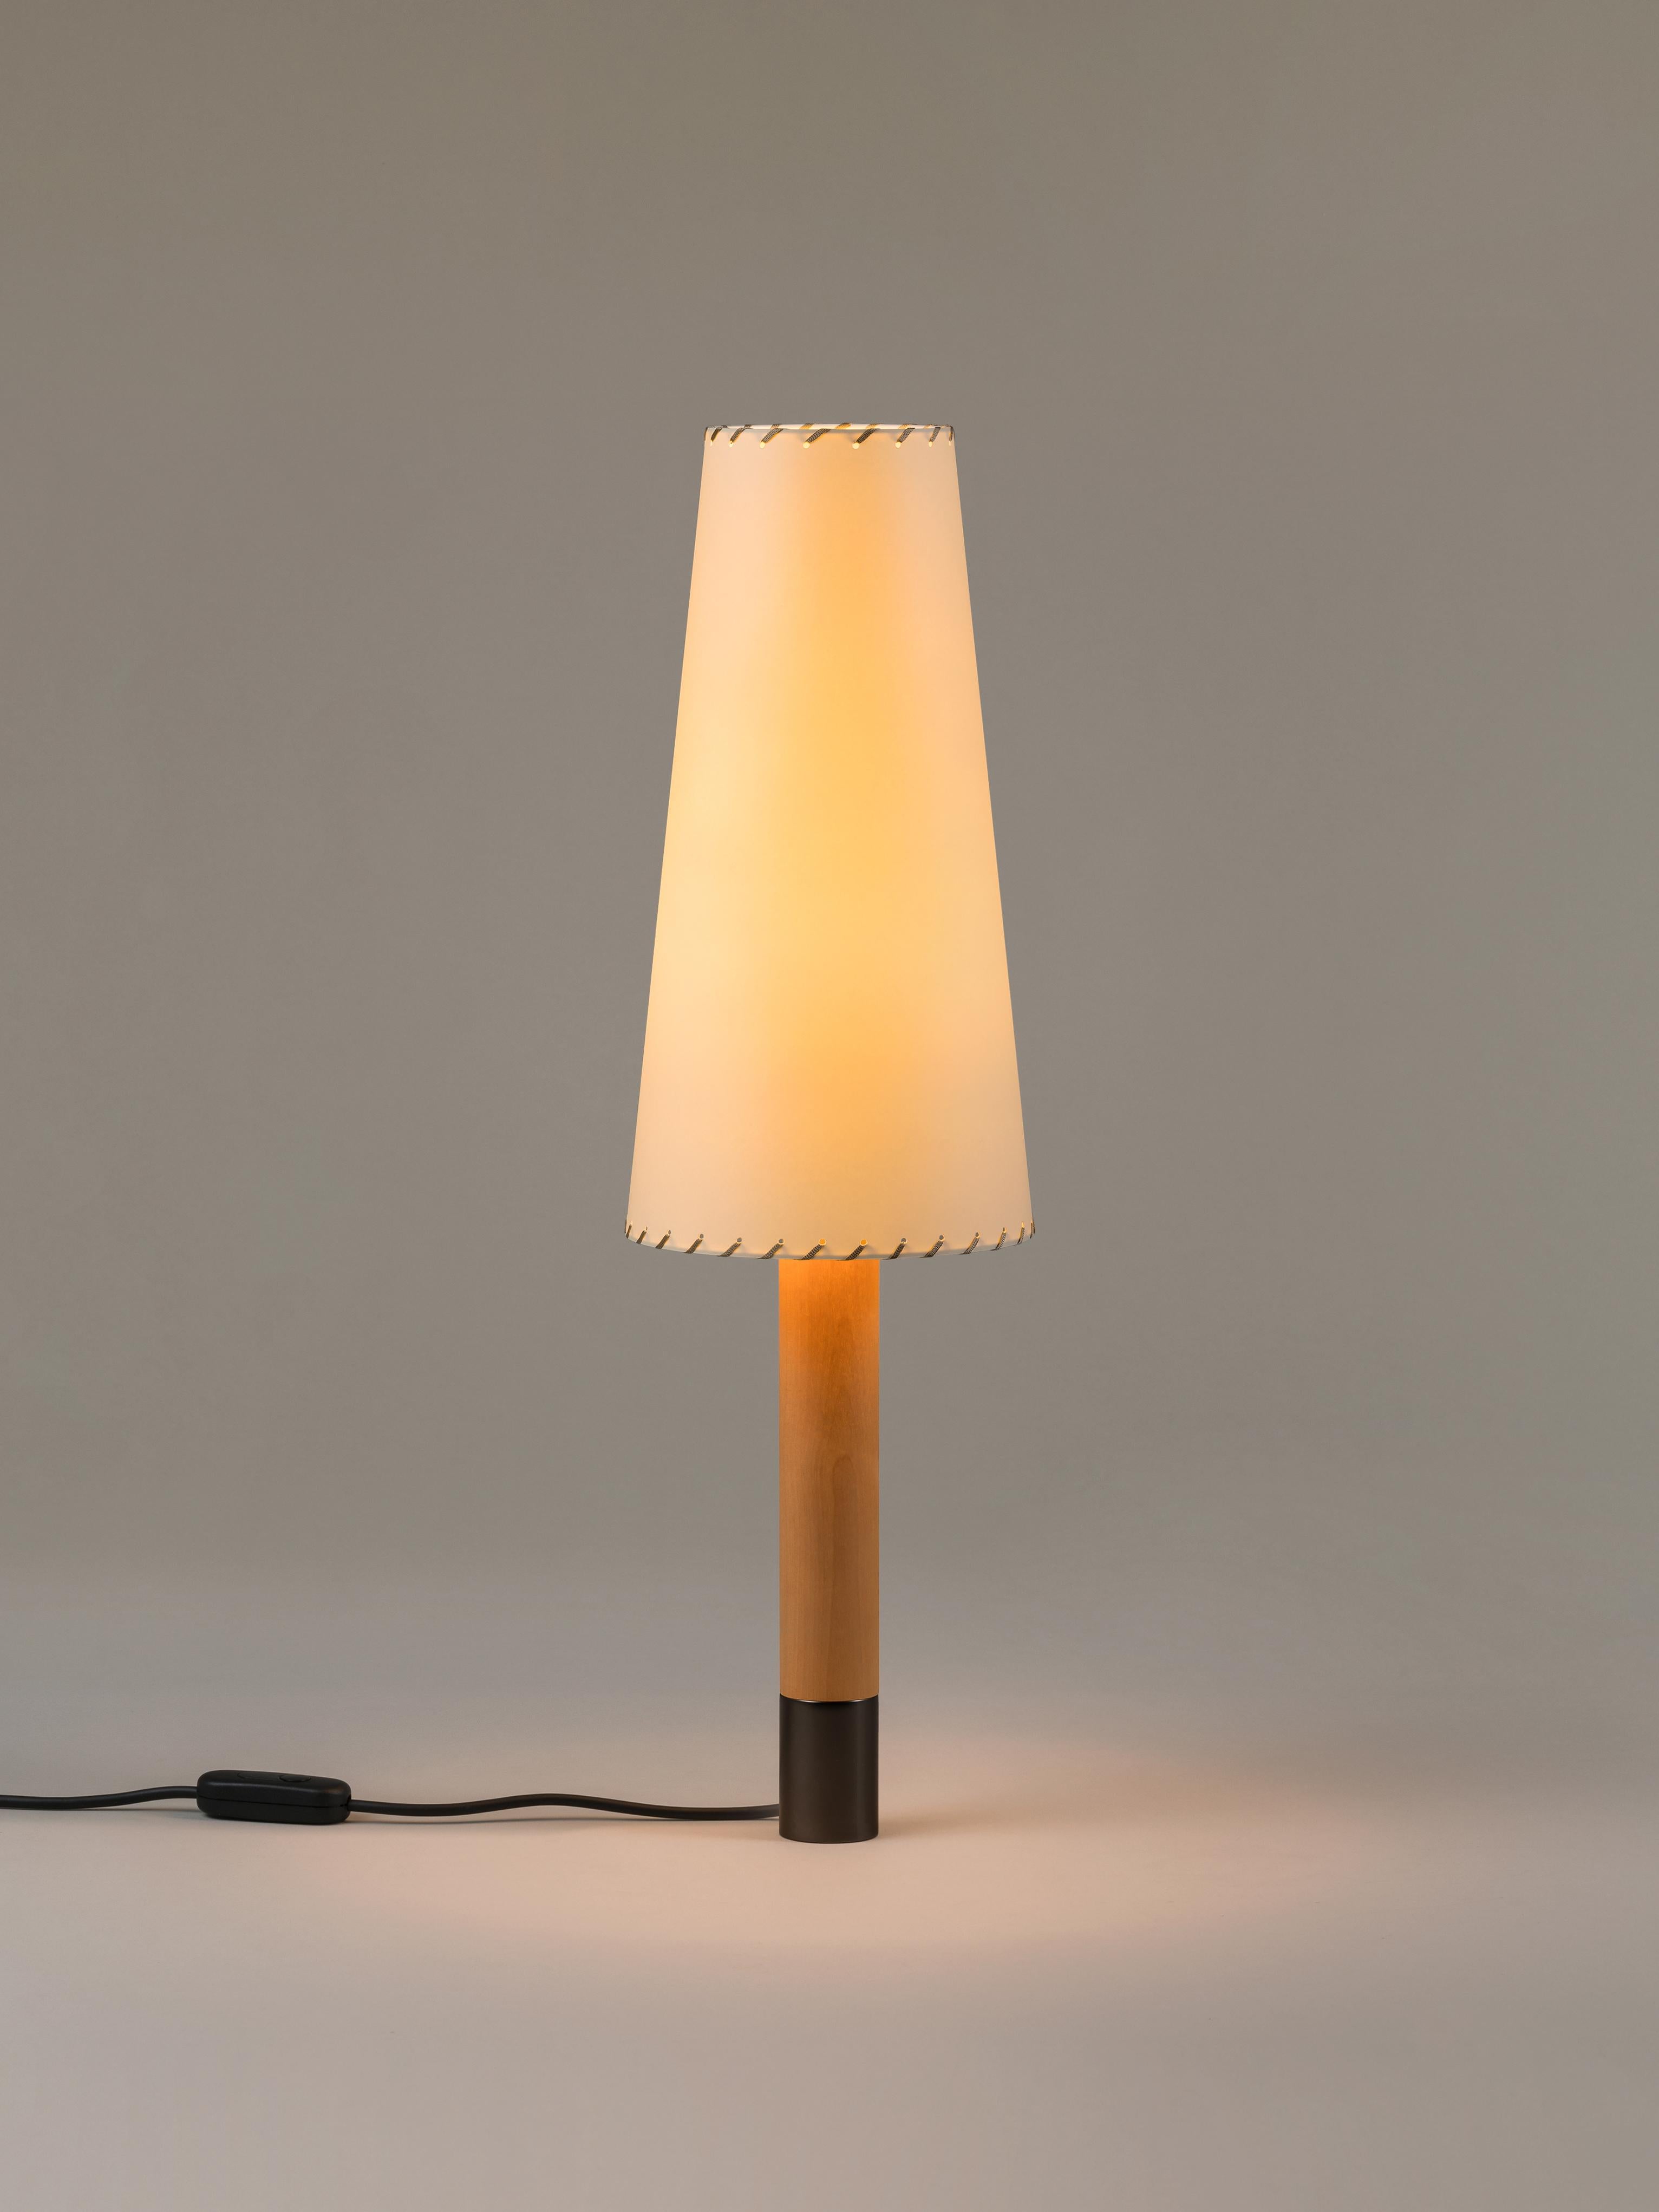 Bronze básica M2 table lamp by Santiago Roqueta, Santa & Cole
Dimensions: D 20 x H 71 cm
Materials: Bronze, birch wood, paperboard.
Available in nickel or bronze and with or without the stabilizing disc.

The Básica lamp champions the return to